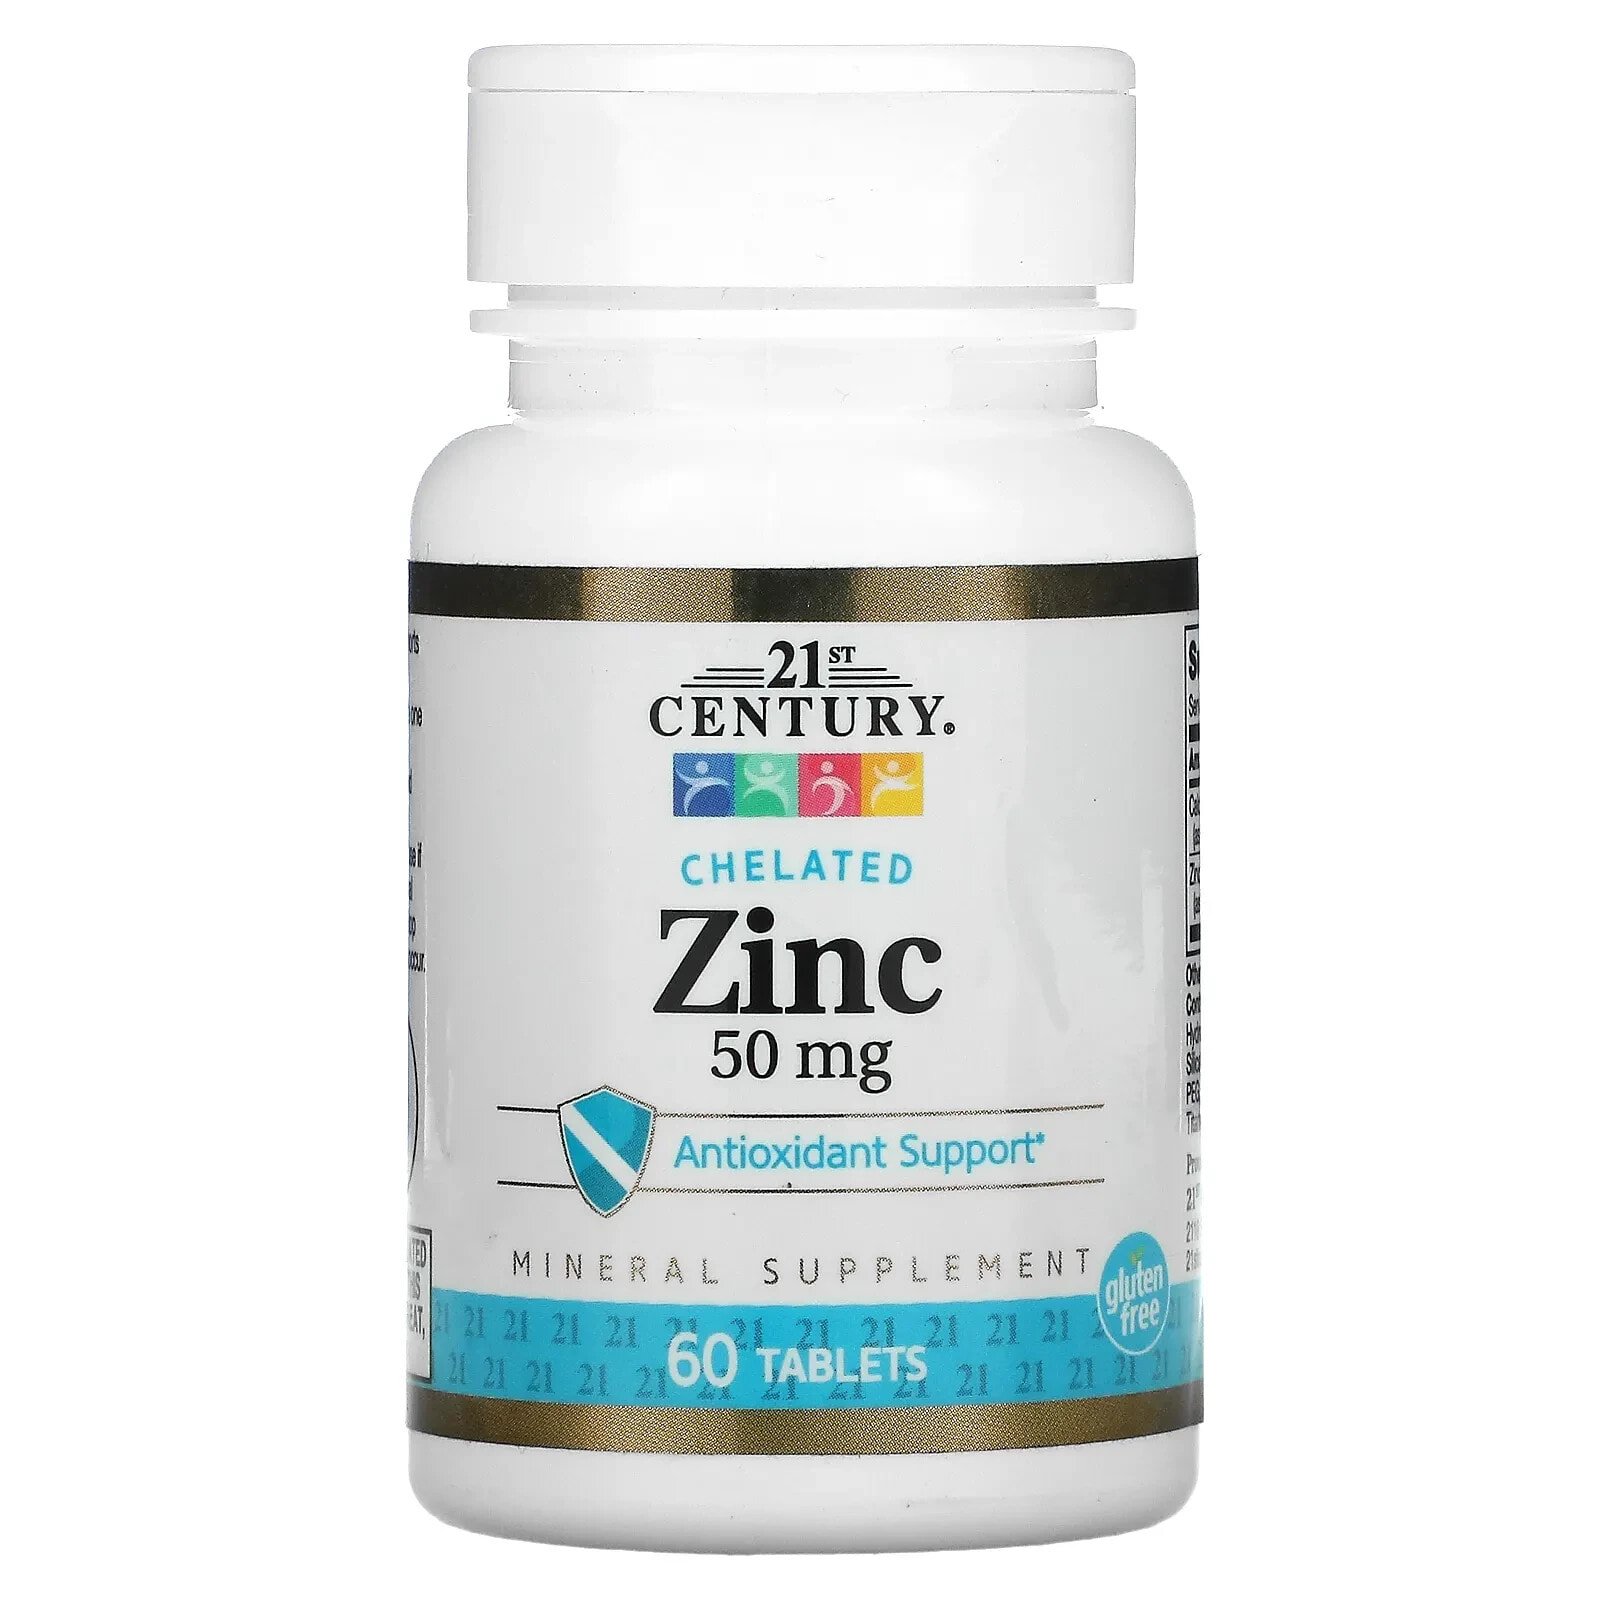 Chelated Zinc, 50 mg, 60 Tablets